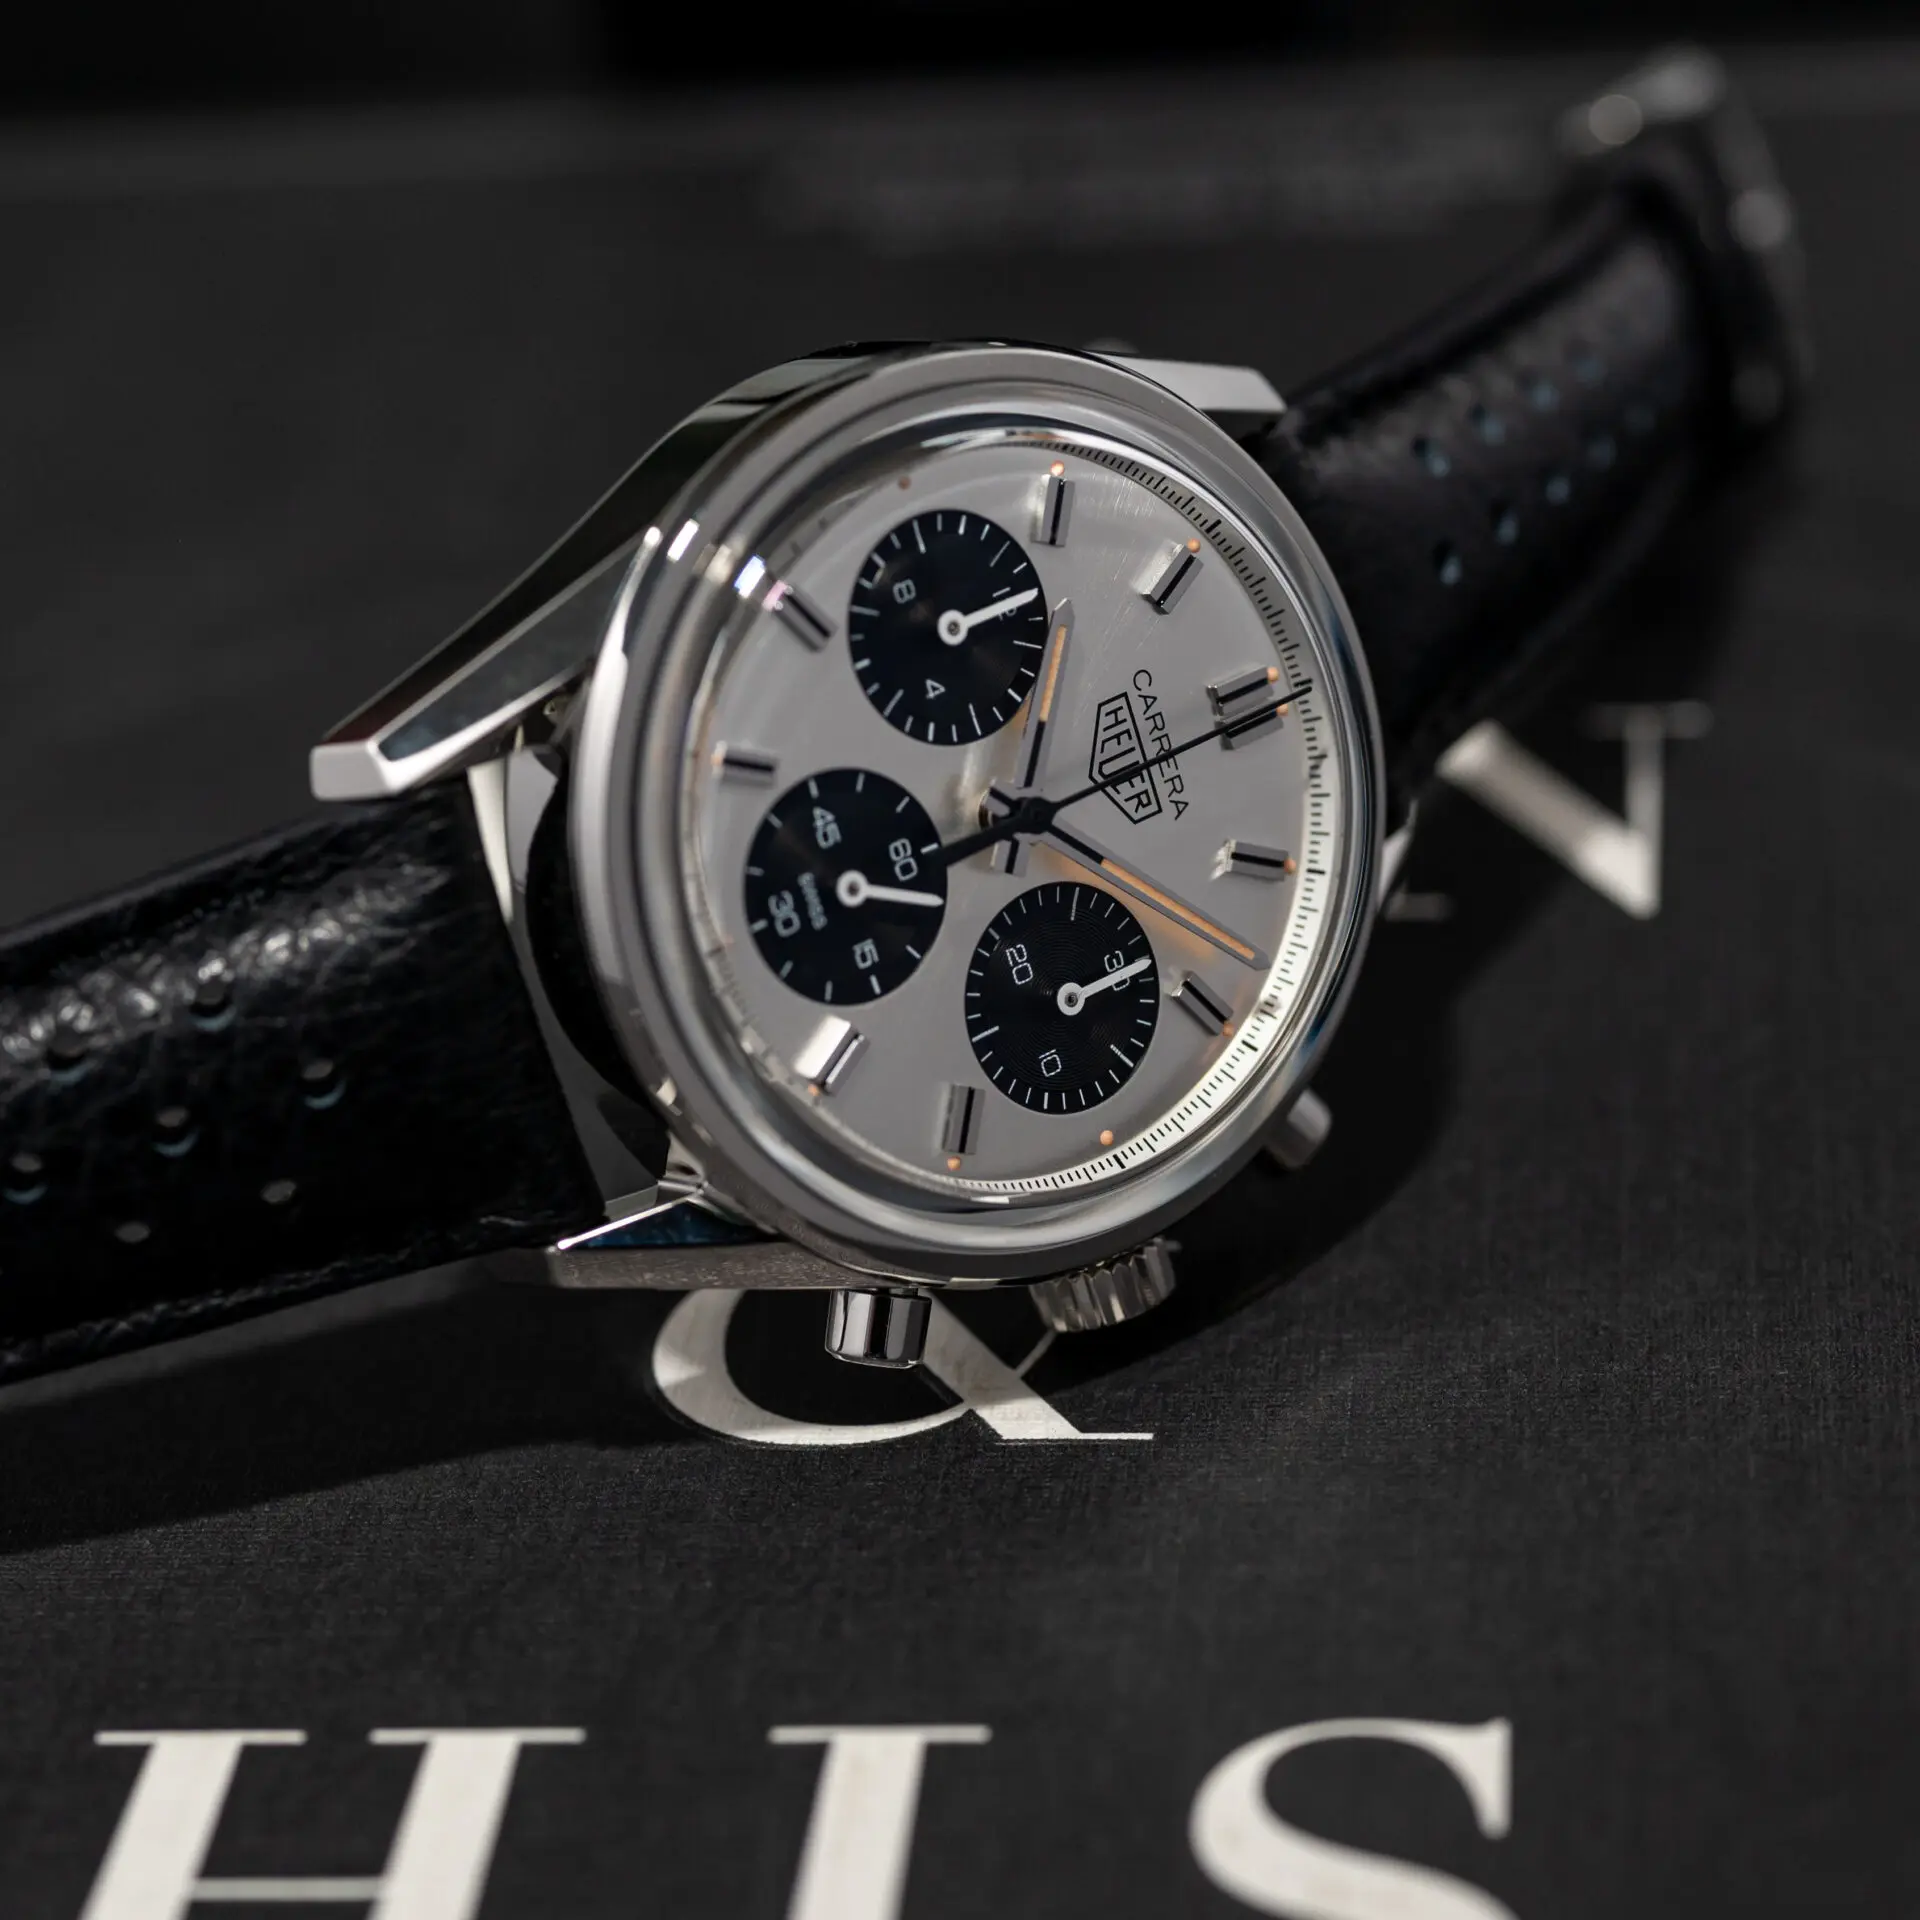 The New Carrera 60th Anniversary Limited Edition By TAG Heuer